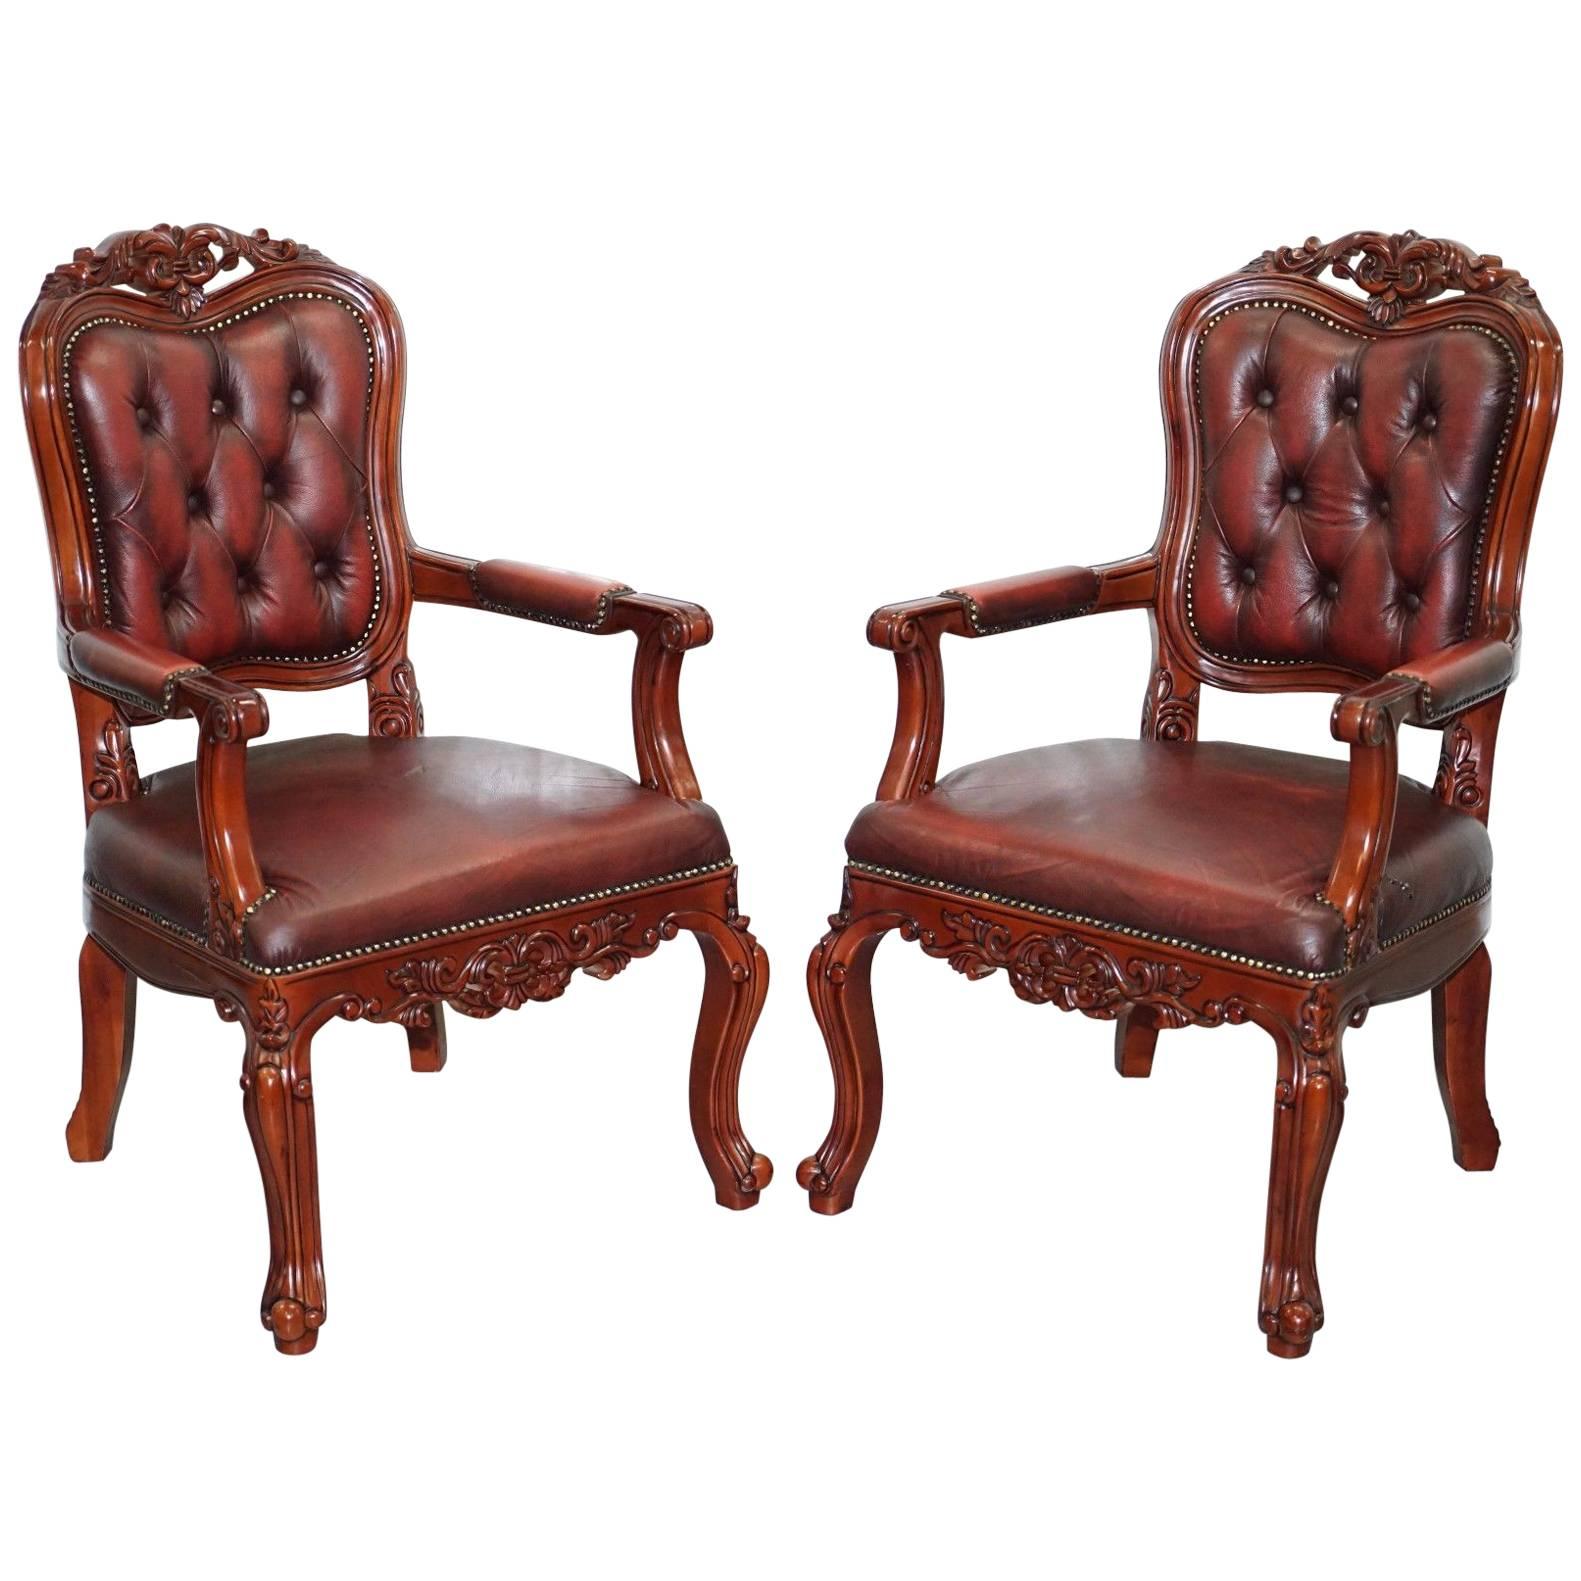 Pair of Chesterfield Vintage French Louis Oxblood Oversized Carved Armchairs